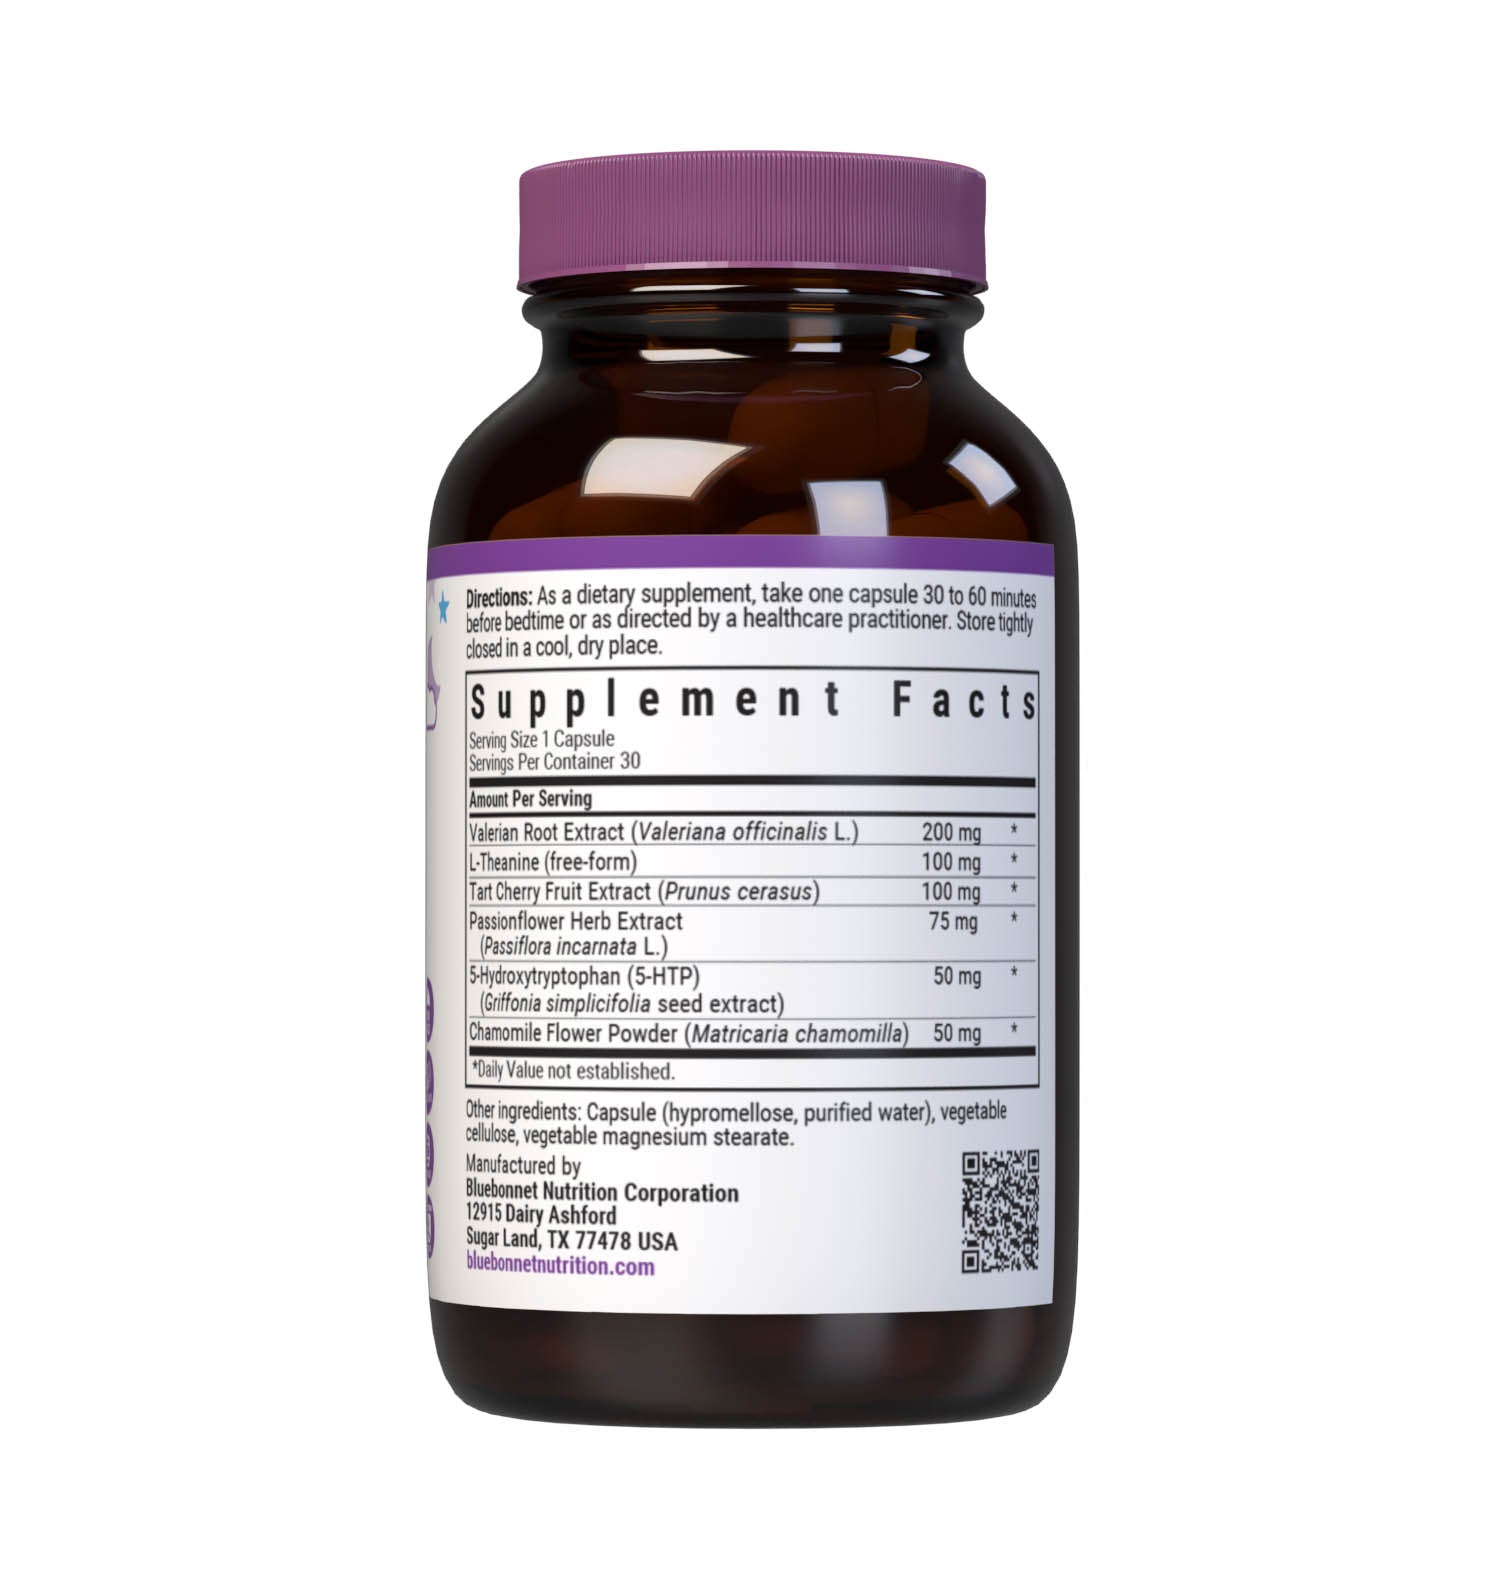 Bluebonnet’s Targeted Choice Sleep Support 30 Vegetable Capsules are specially formulated with a unique blend of whole food nutrients, amino acids and herbal extracts to help promote restful sleep for those affected by occasional sleeplessness. Supplement facts panel. #size_30 count